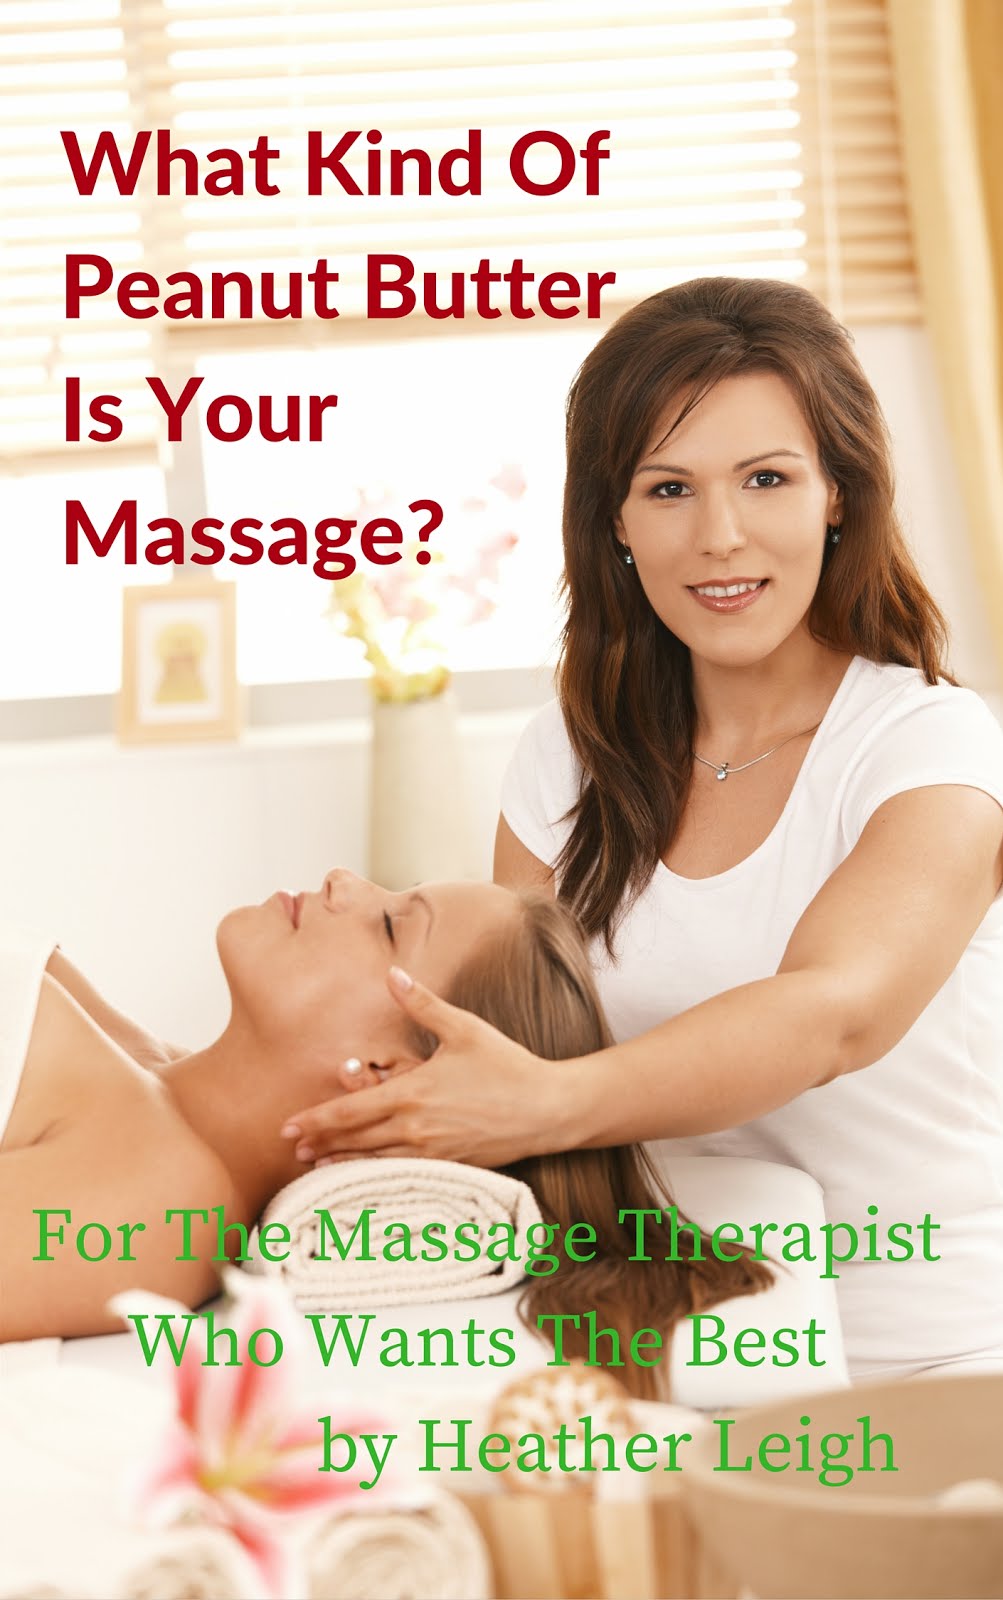 For the new massage therapist.